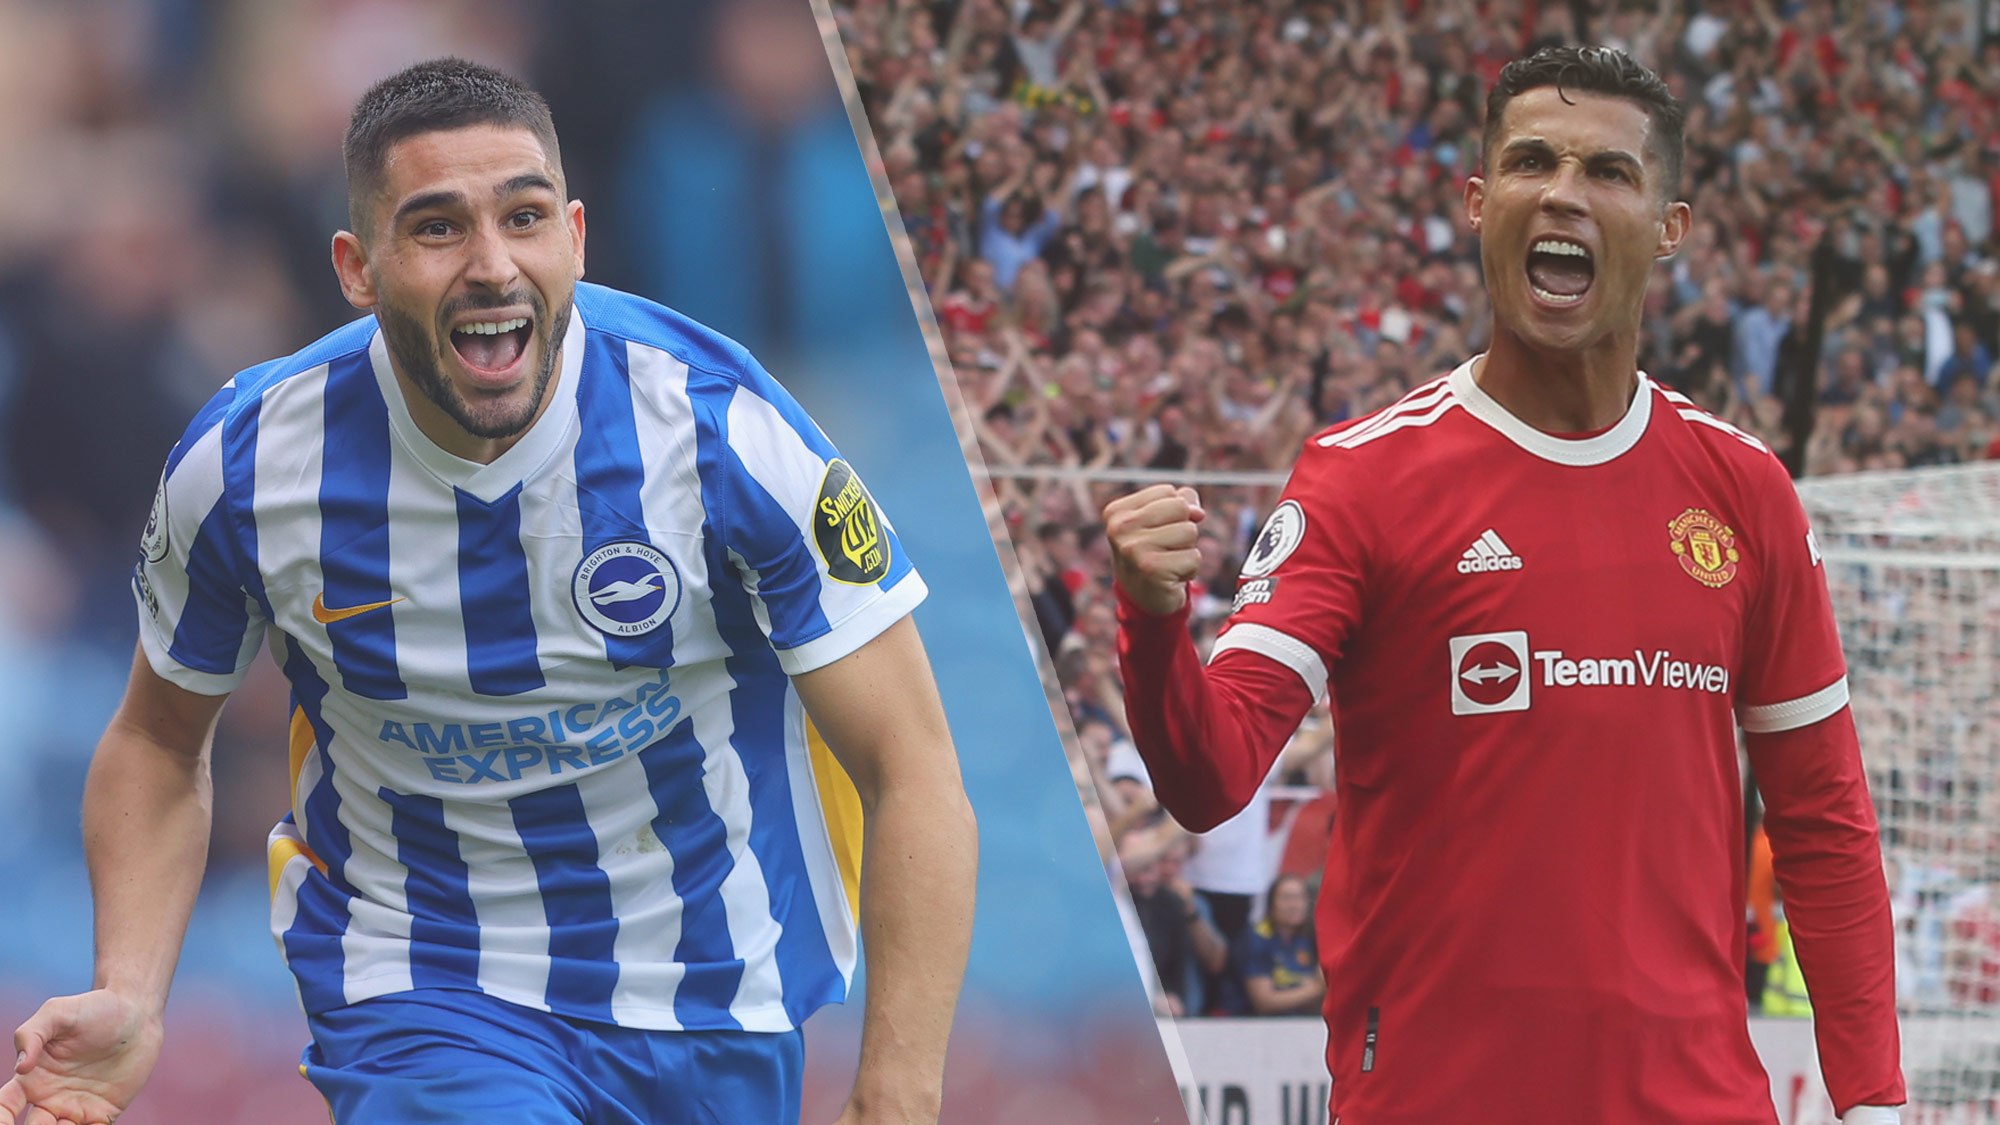 Brighton vs Manchester United live stream and how to watch Premier League game online